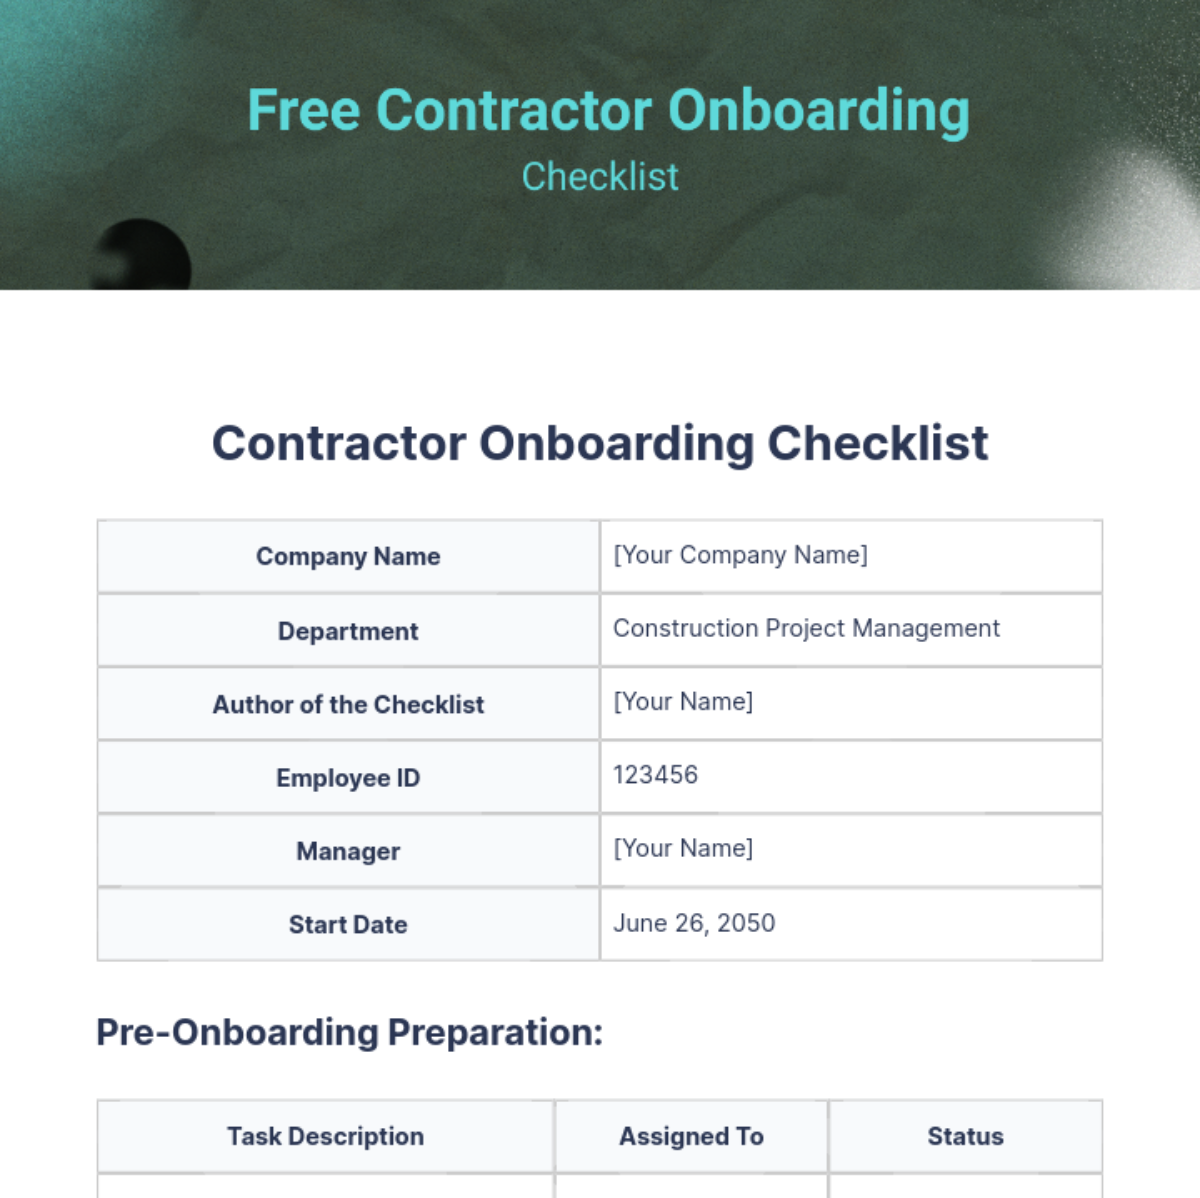 Free Contractor Onboarding Checklist Template